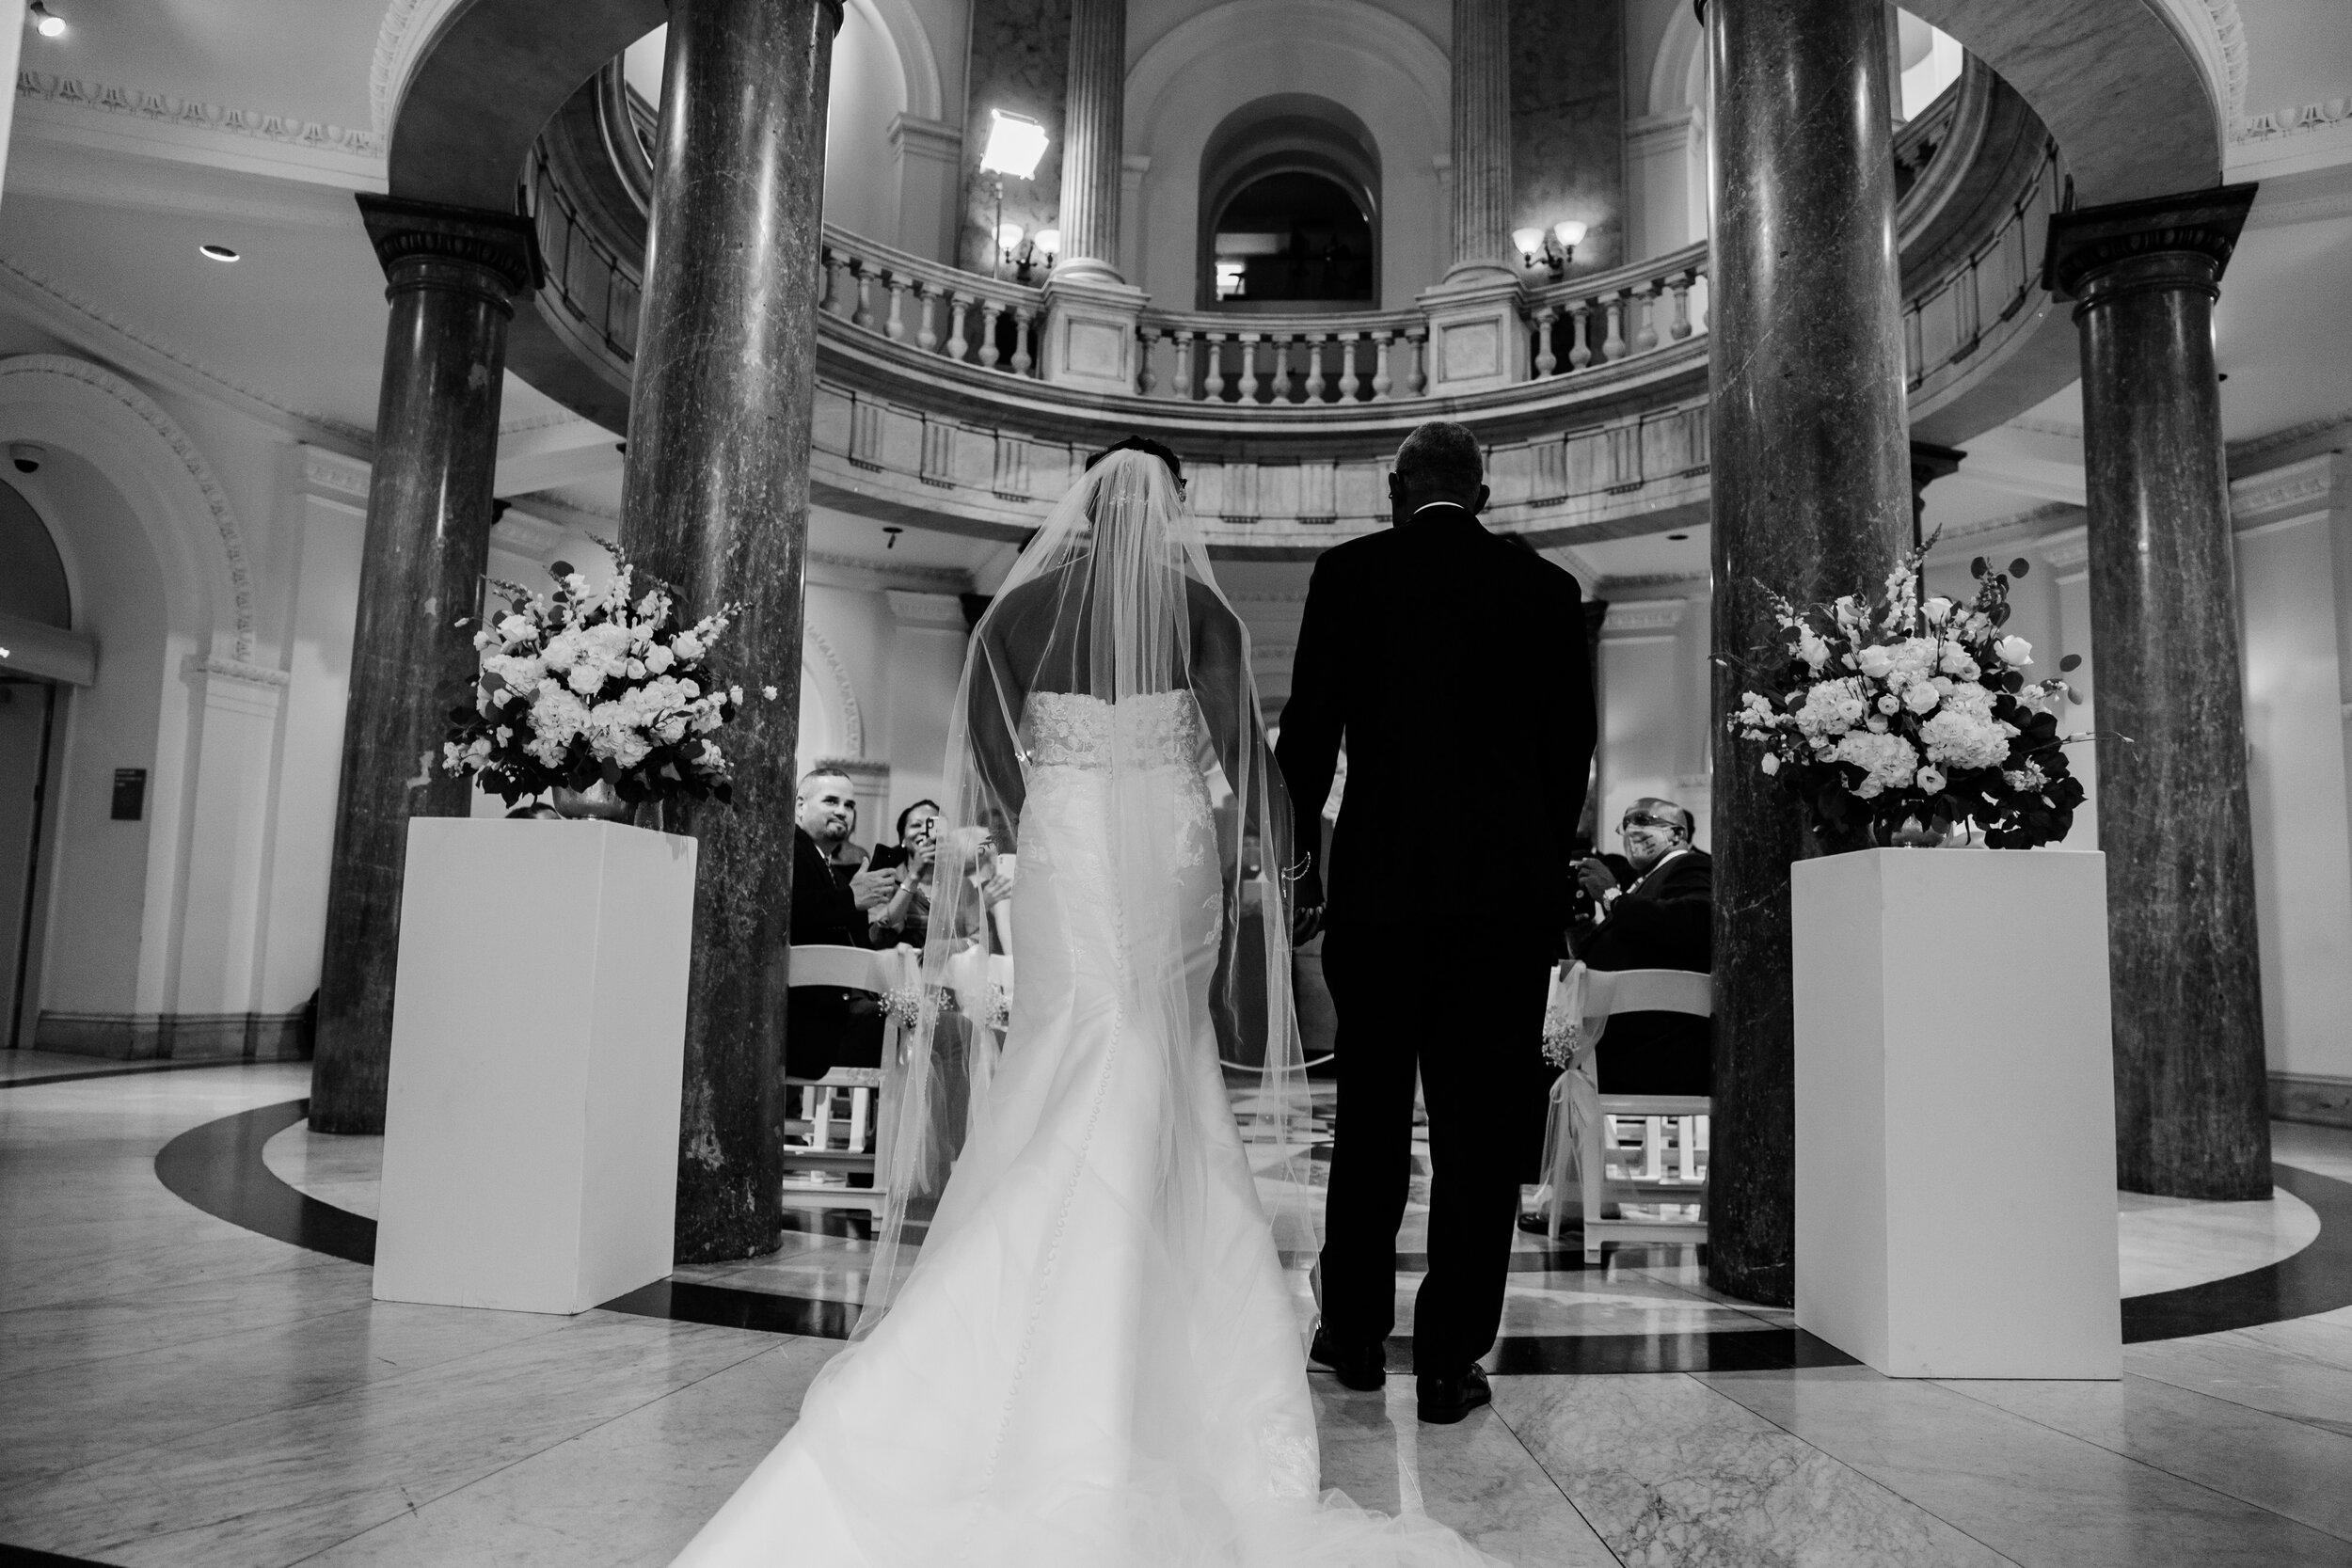 get married in baltimore city hall shot by megapixels media biracial couple wedding photographers maryland-64.jpg